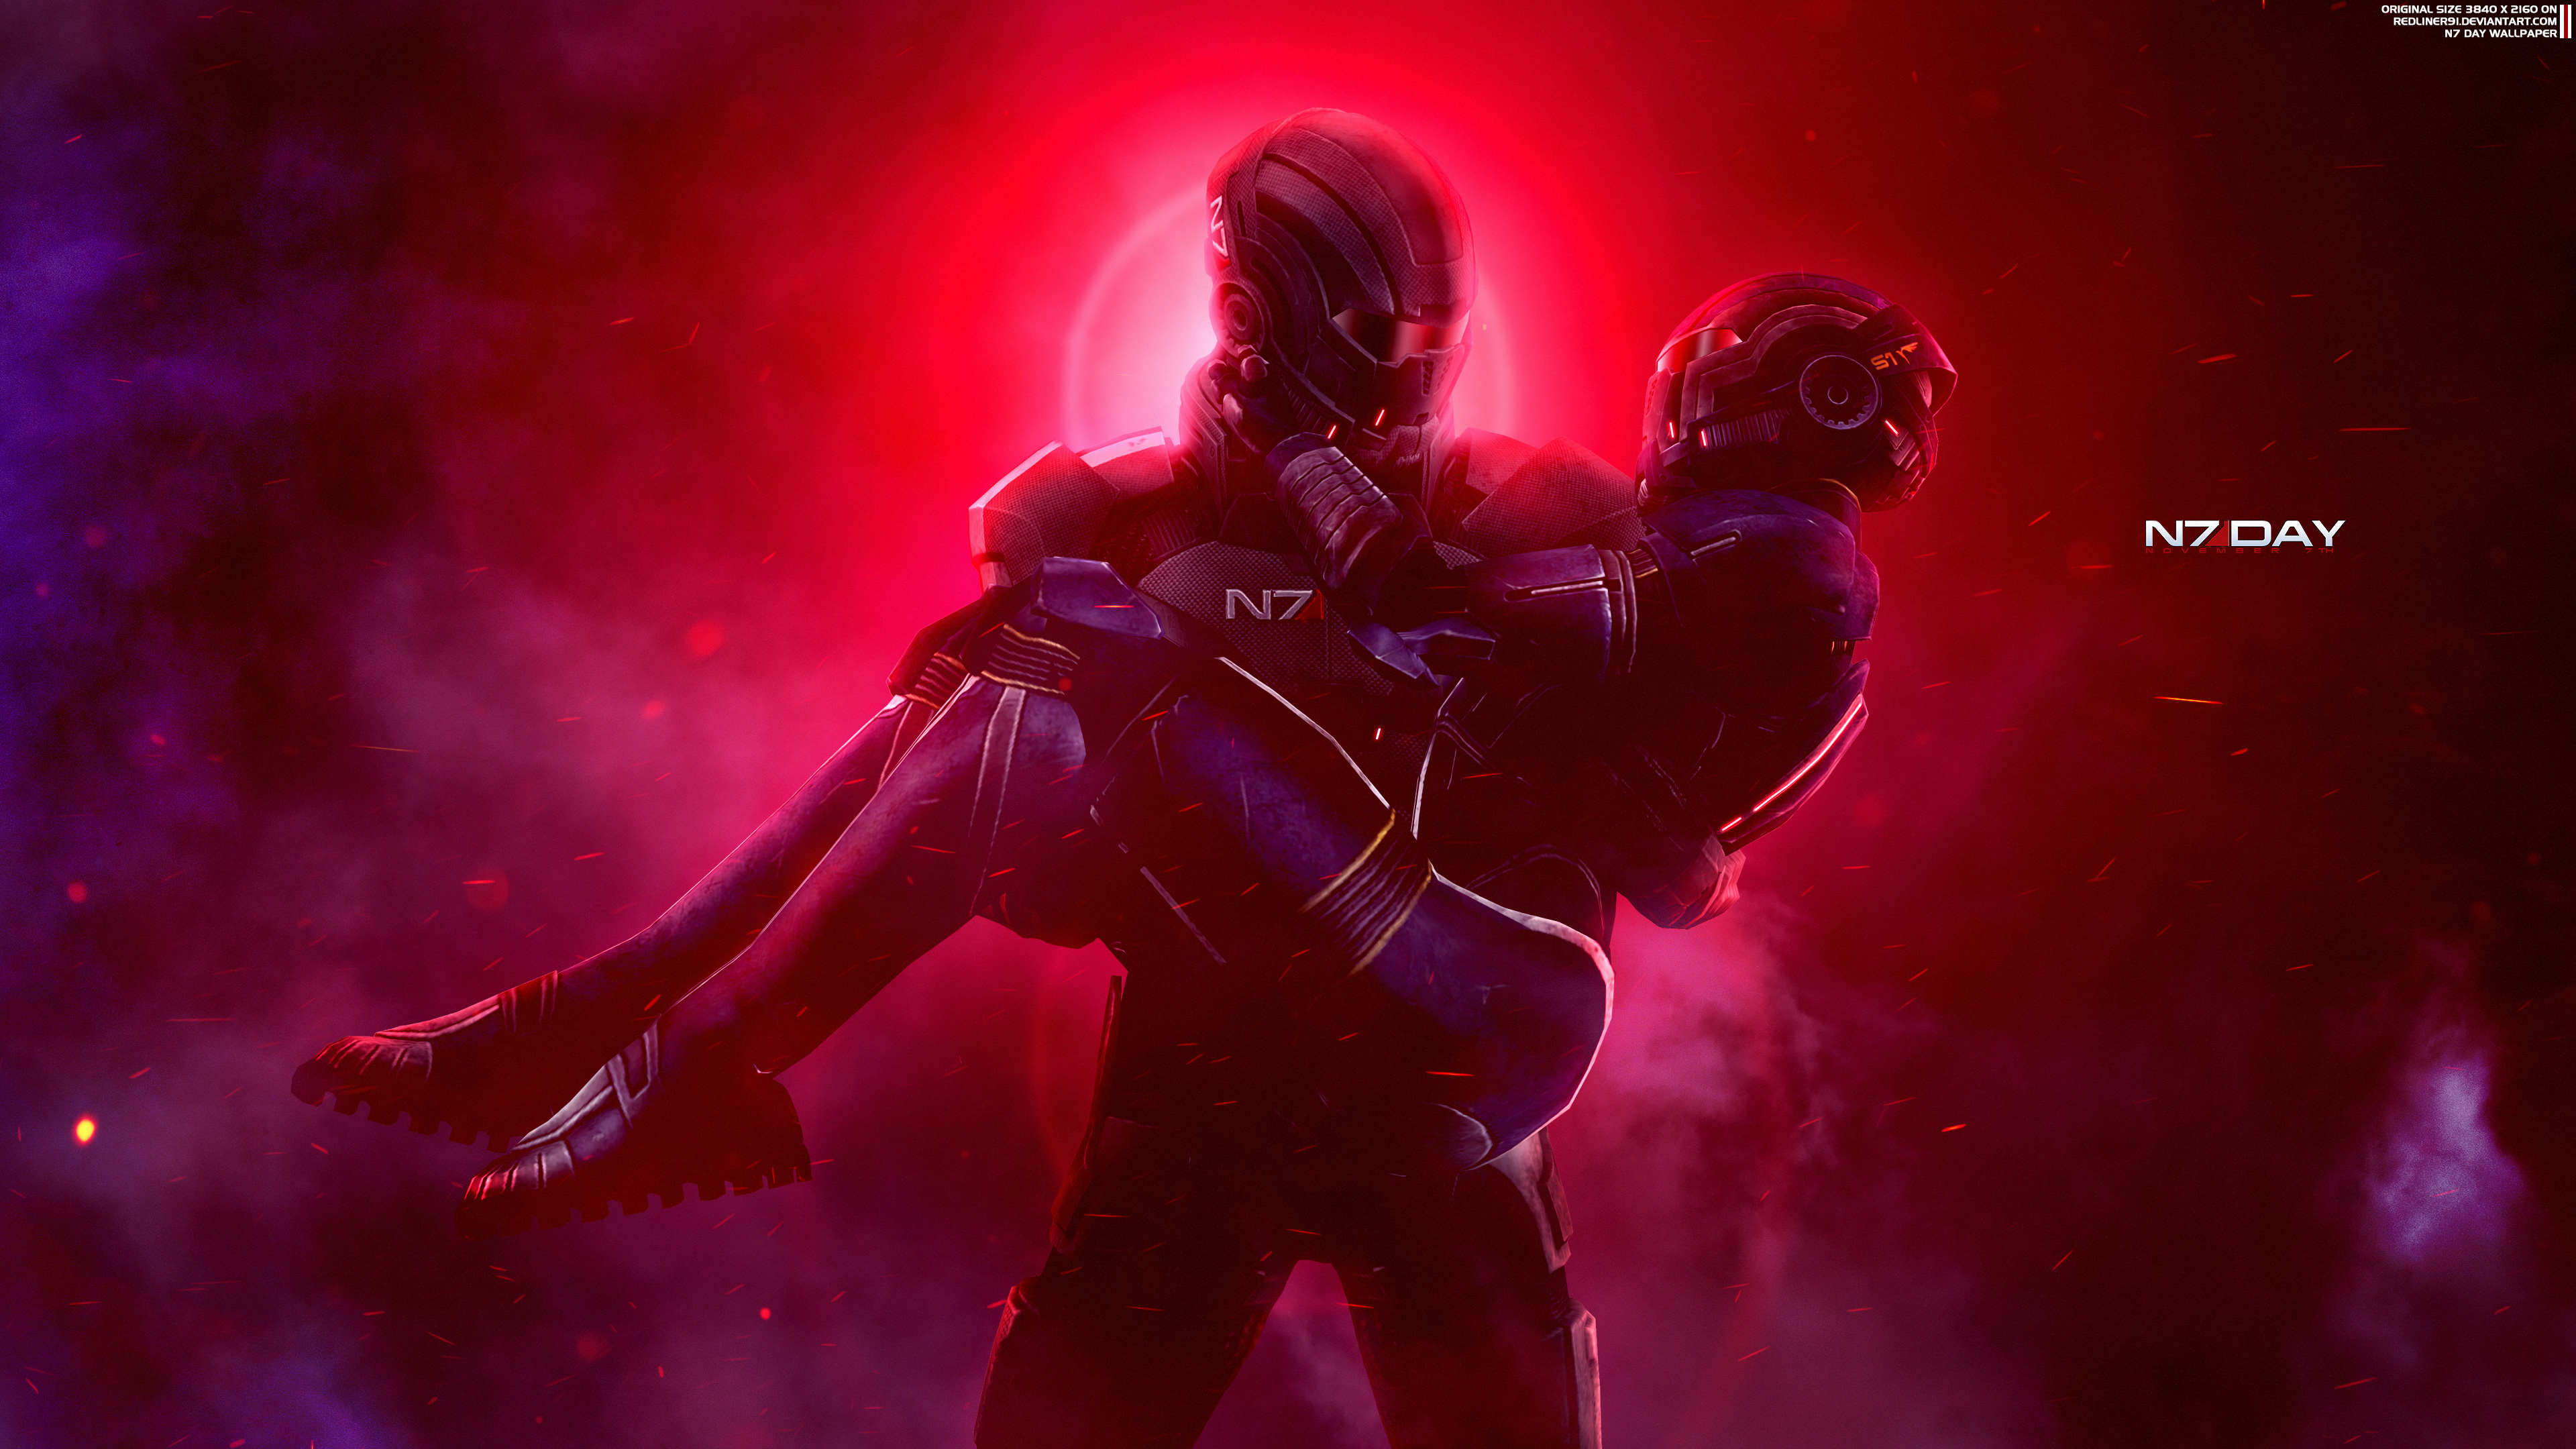 Heres some Mass Effect wallpapers for your phones guys enjoy  r masseffect